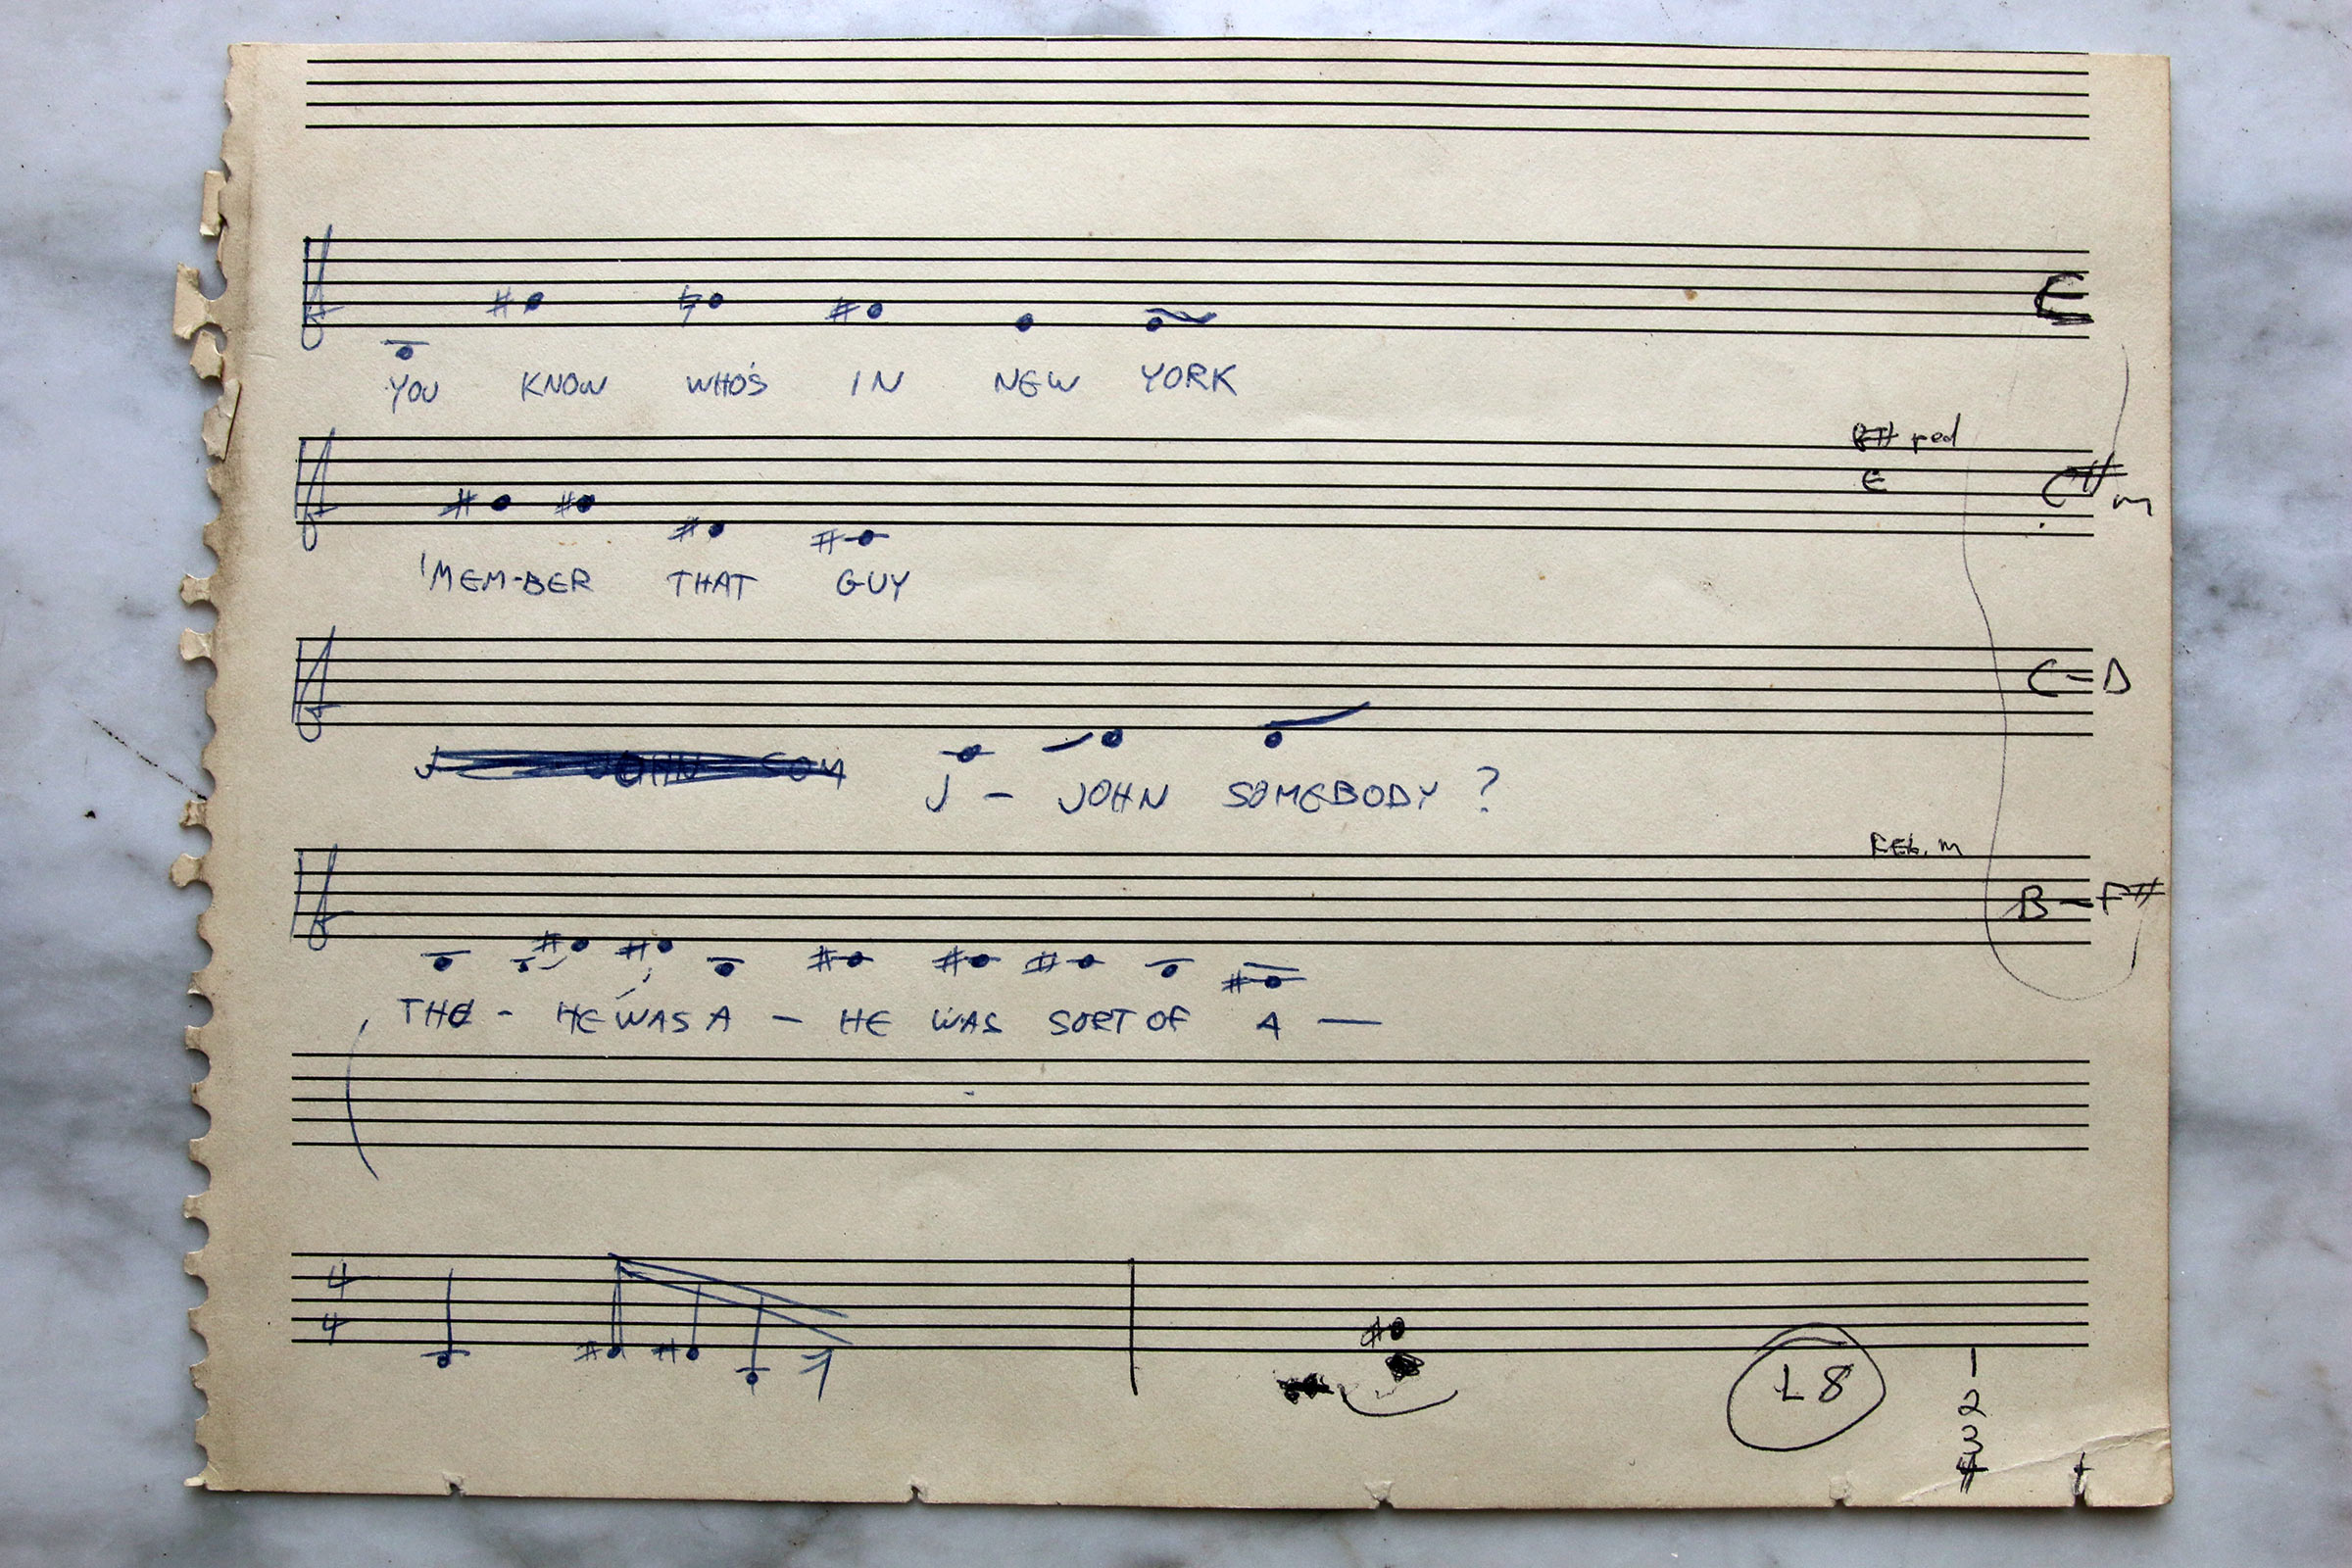 The original sheet of music notation paper containing Scott Johnson's musical transcriptions of four phrases of spoken conversation that eventually became the basis for his composition John Somebody.